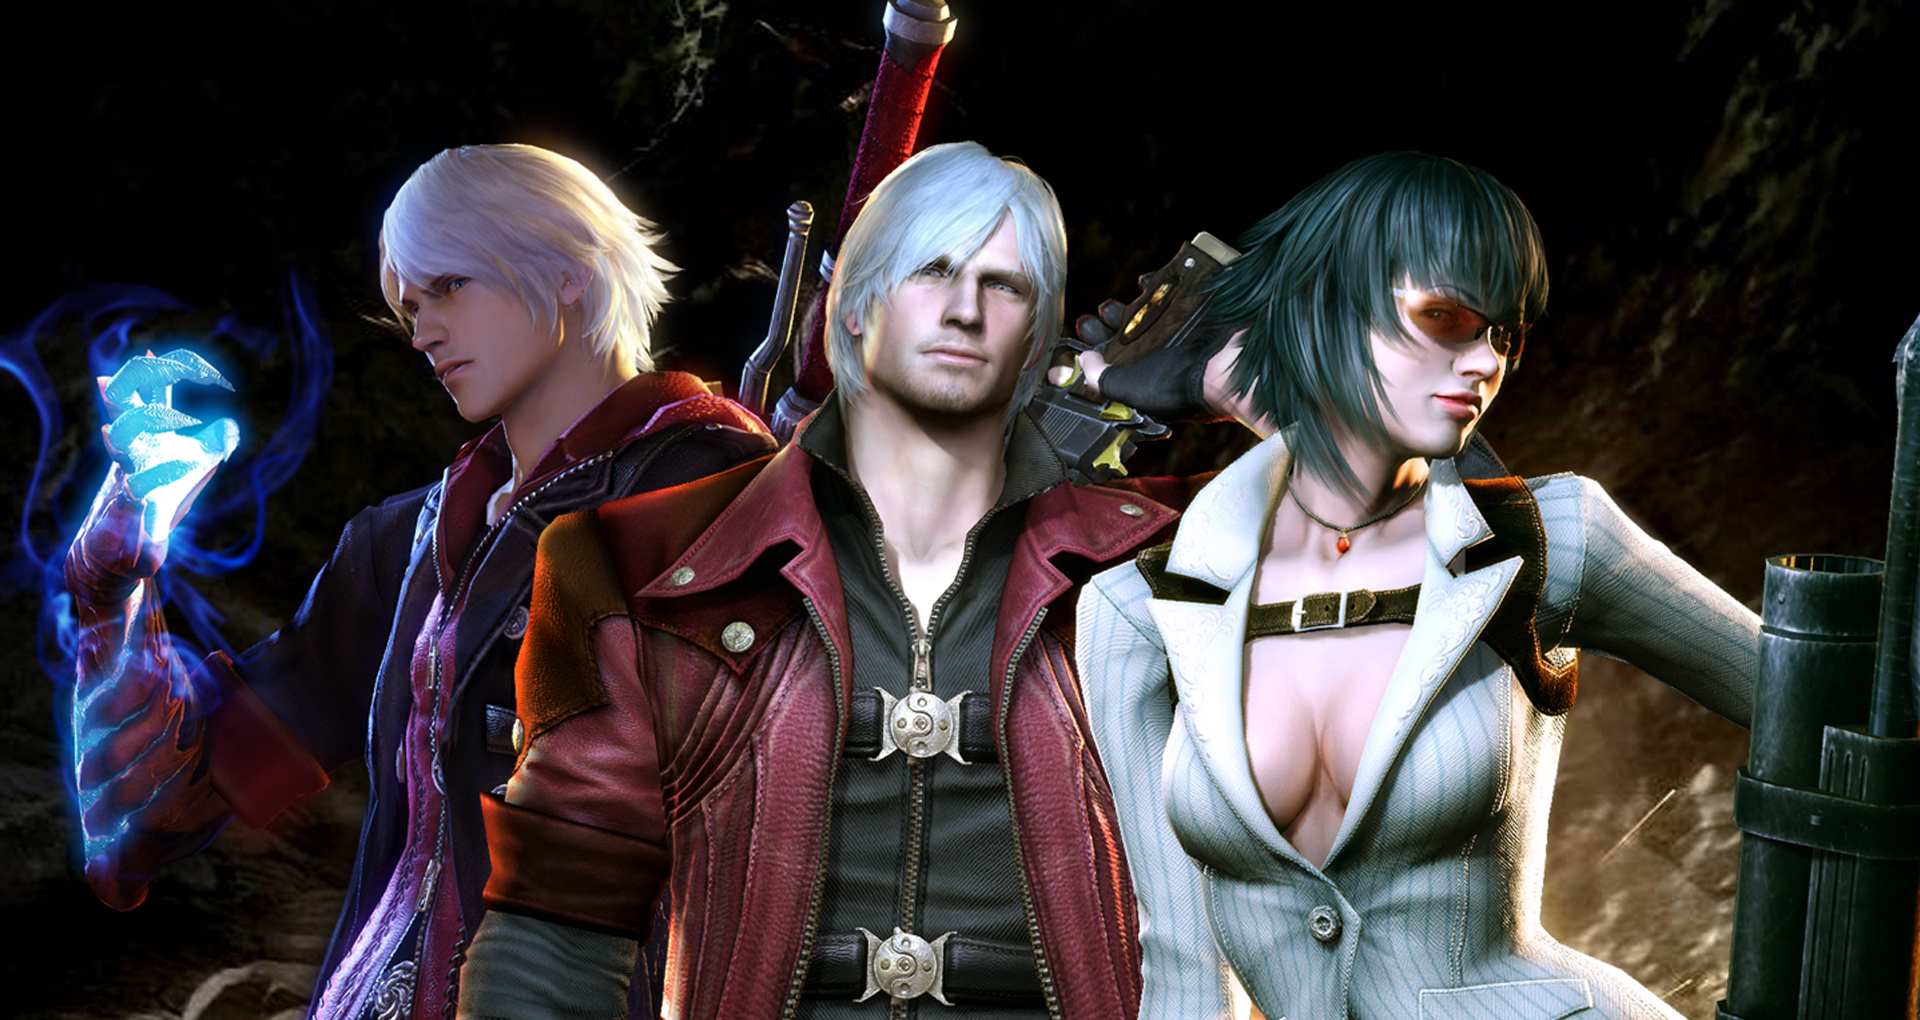 Devil May Cry  Devil may cry, Dante devil may cry, Devil may cry 4